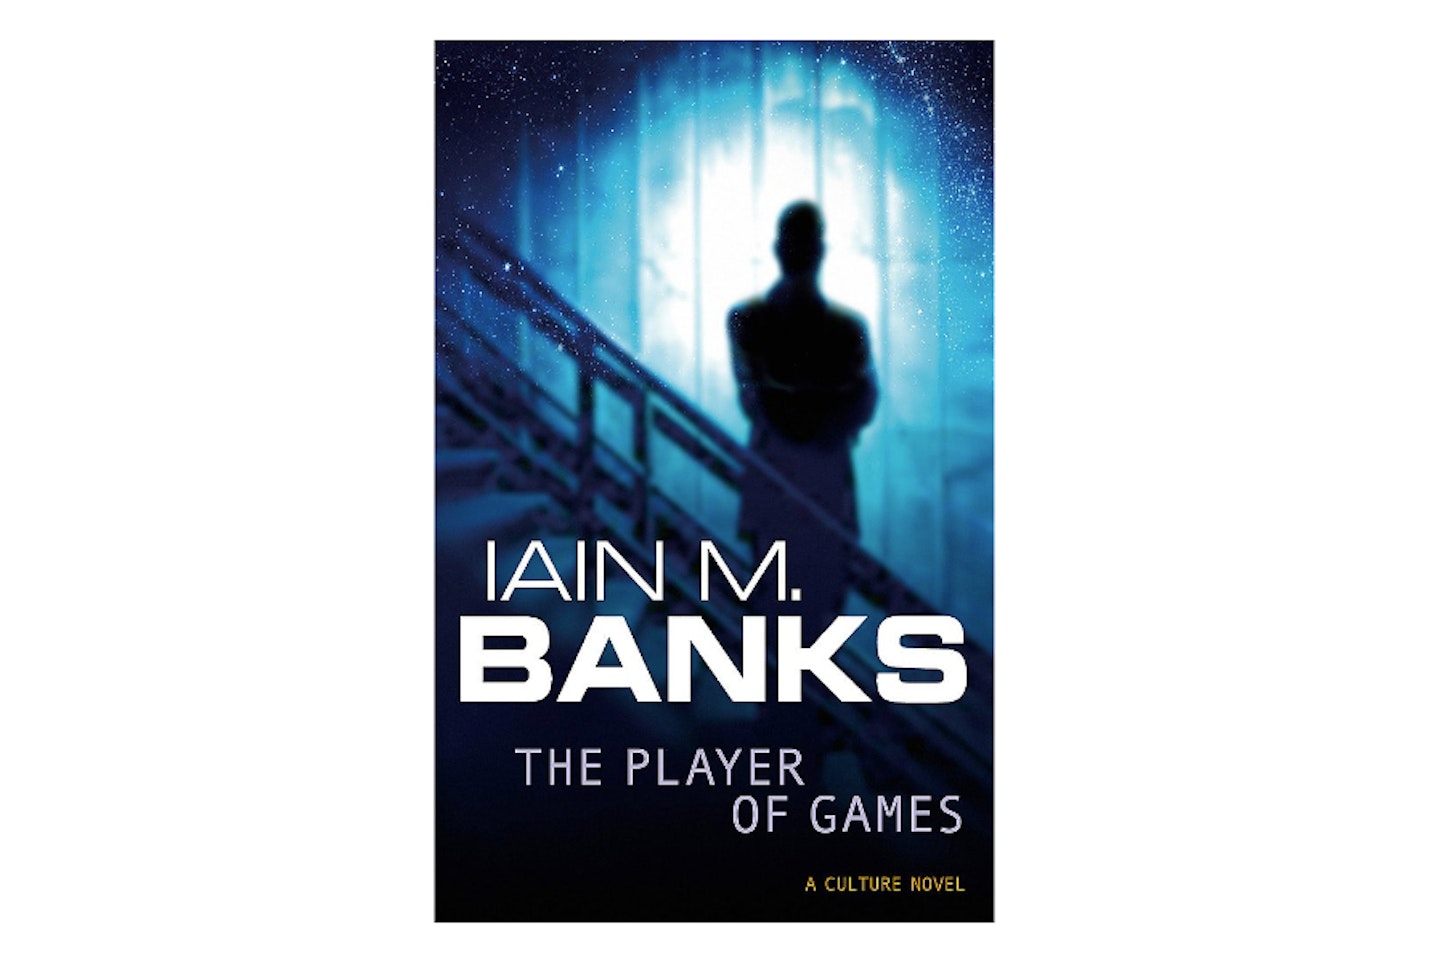 The Player of Games by Iain M. Banks, 1988